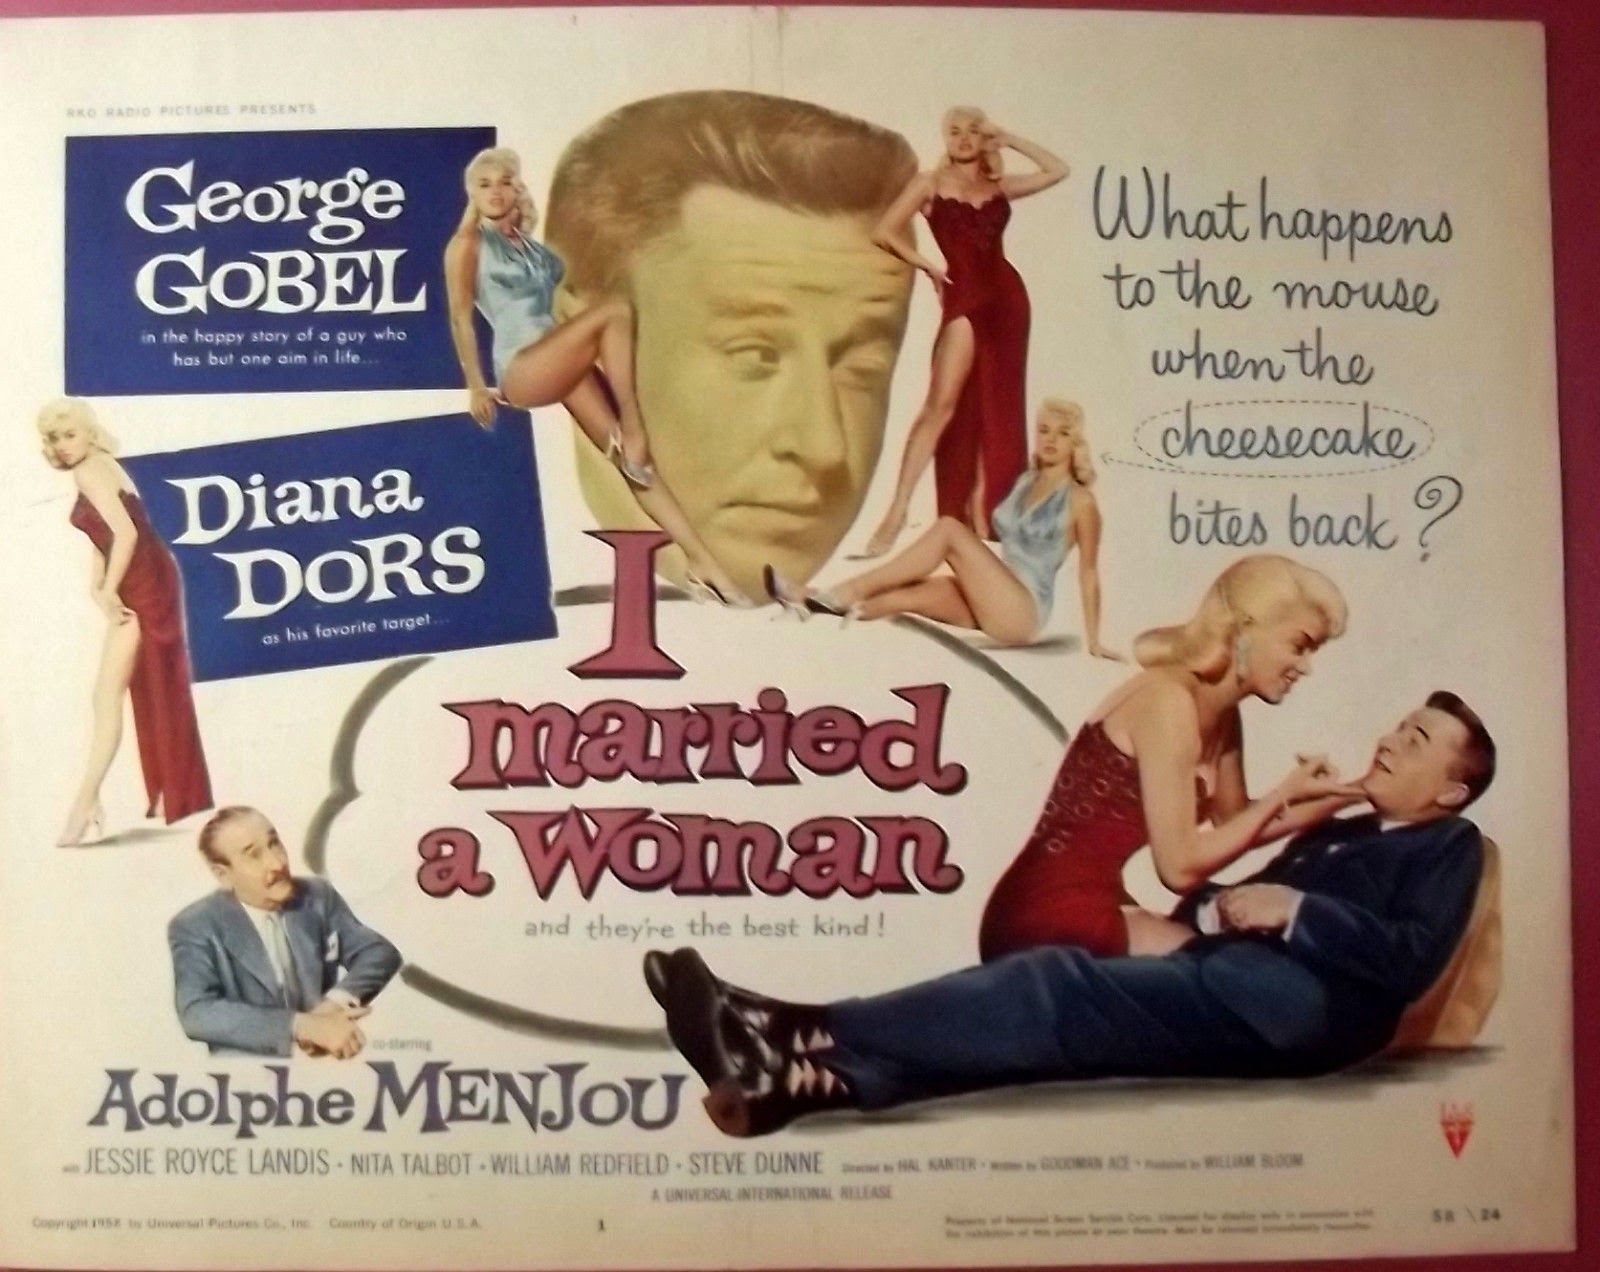 Time Machine to the Twenties: I Married a Woman (1956)